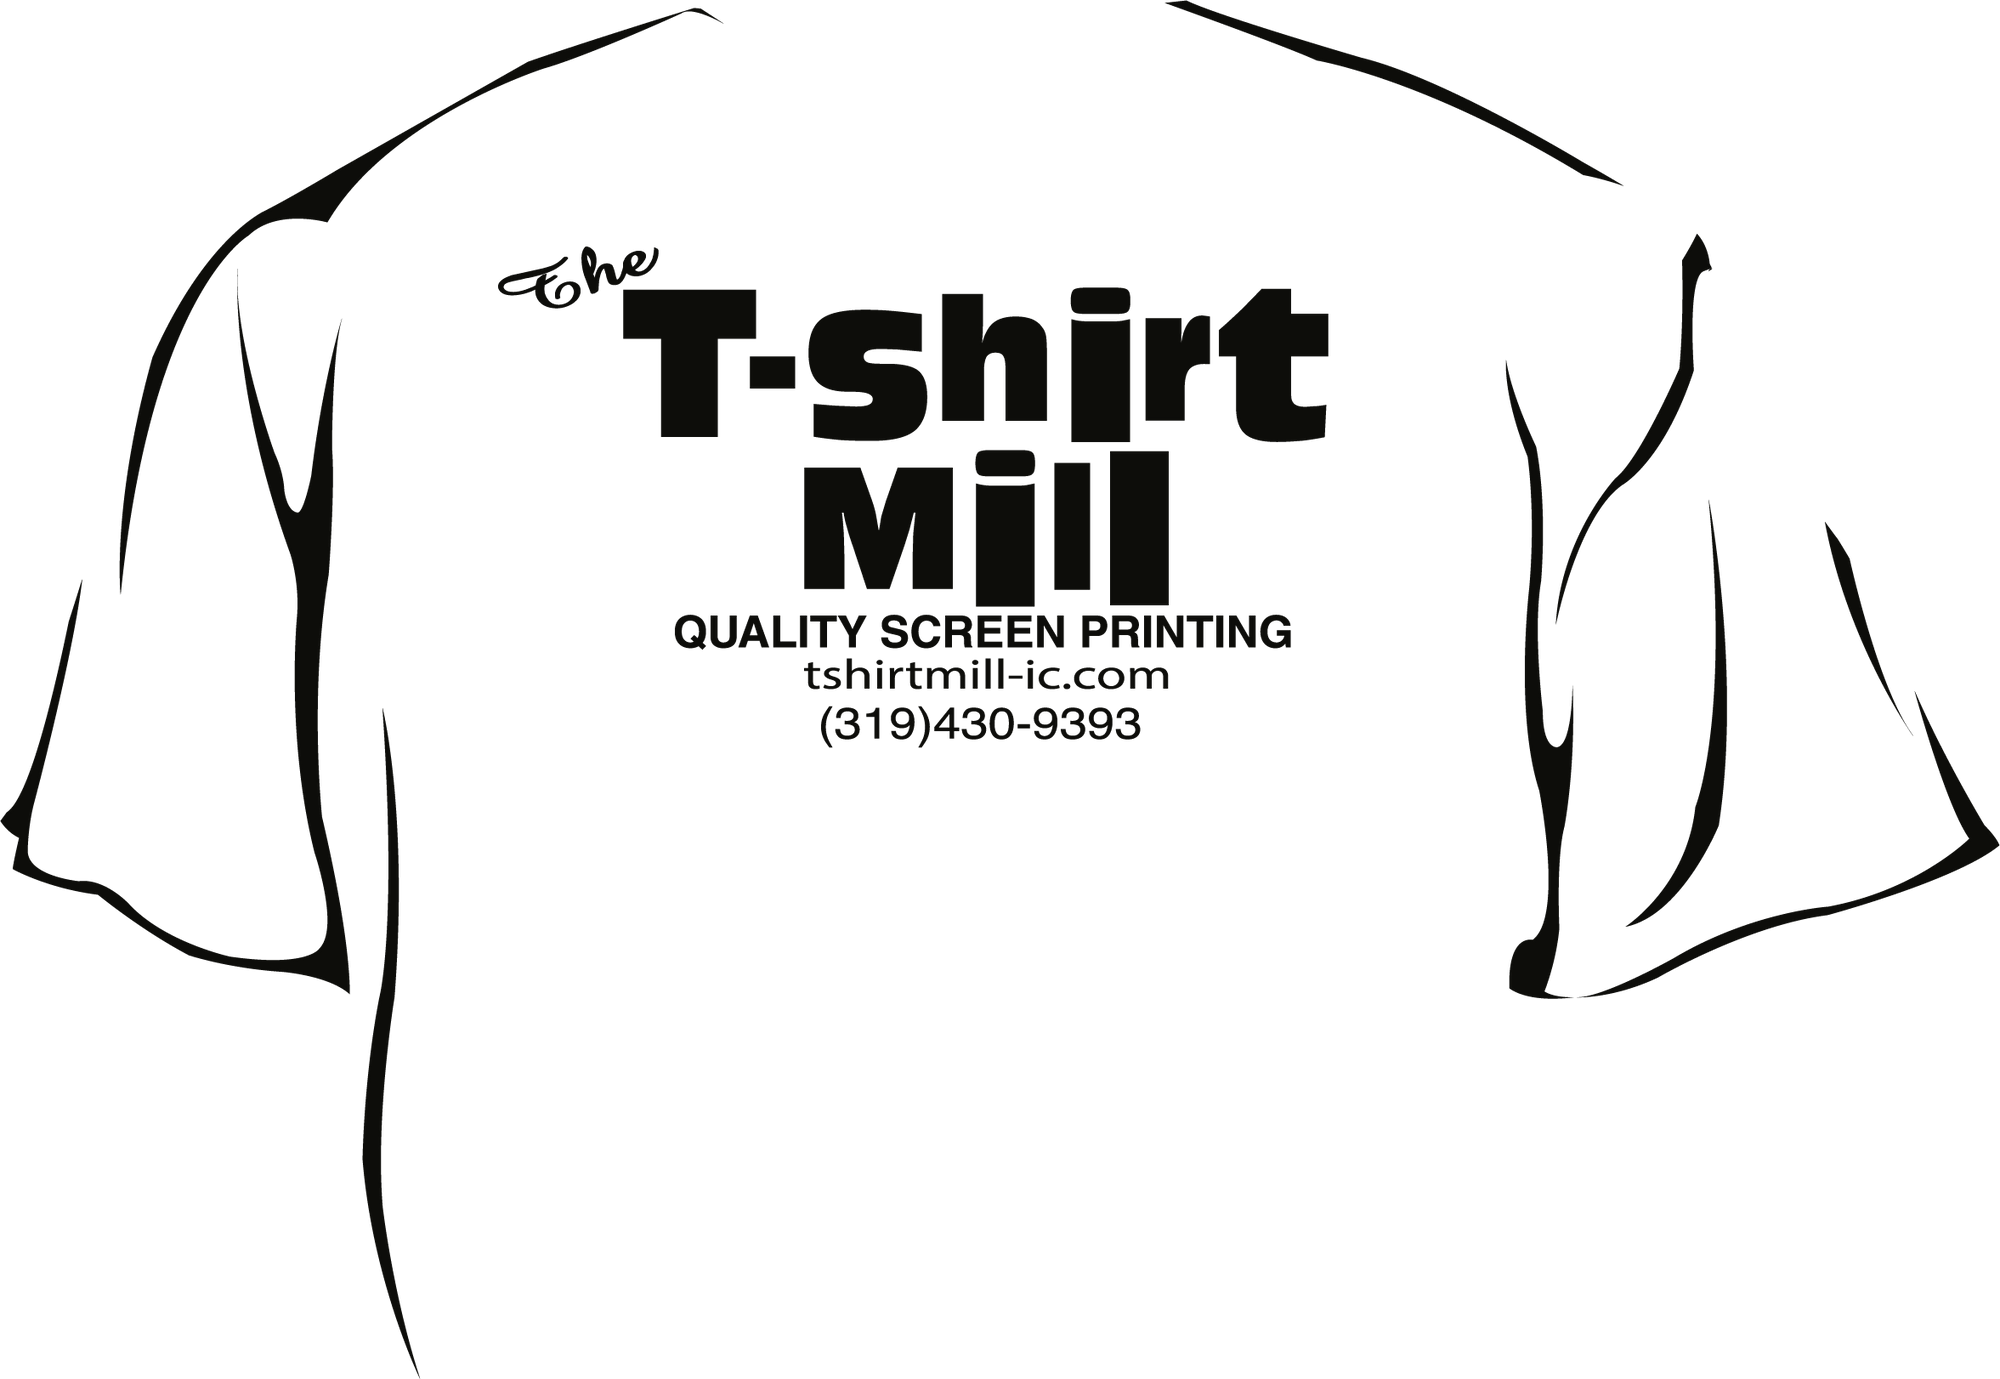 The T-Shirt Mill